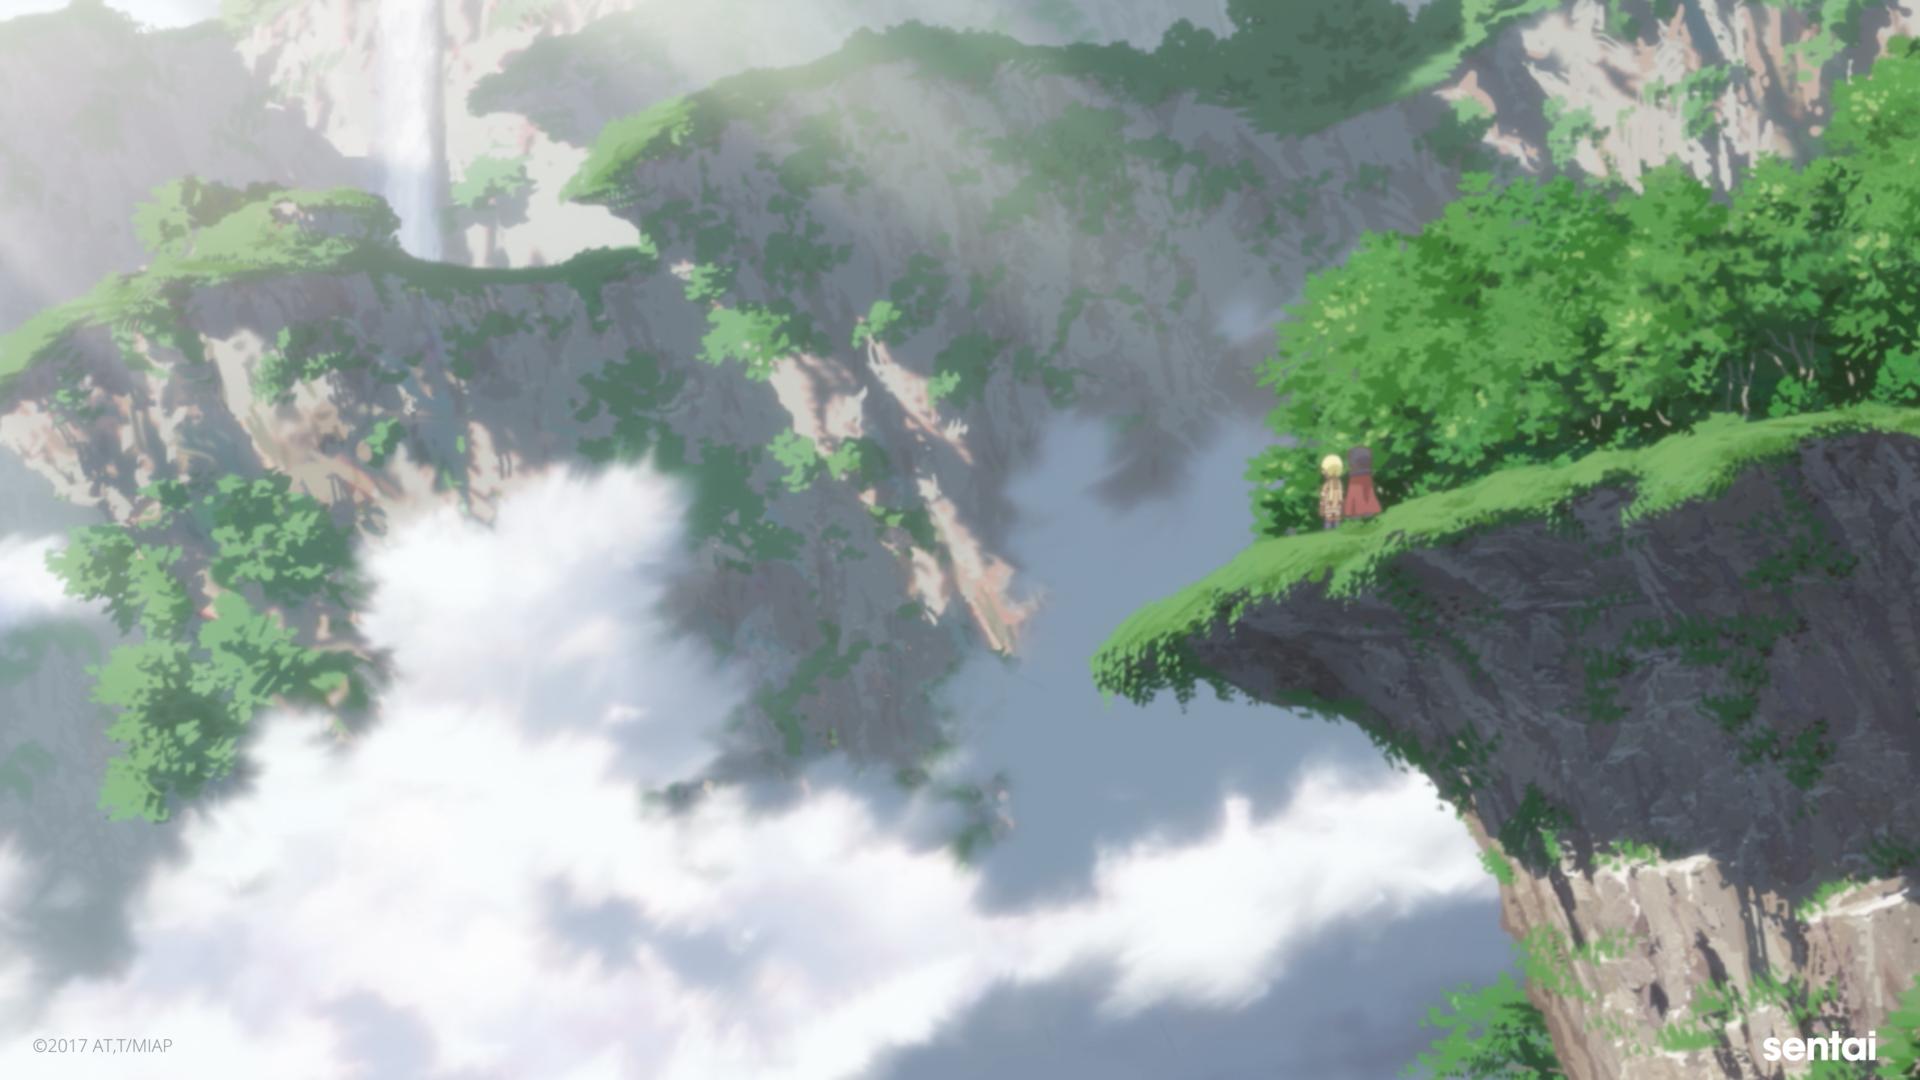 Made in Abyss: Journey's Dawn (Review) – Beneath the Tangles